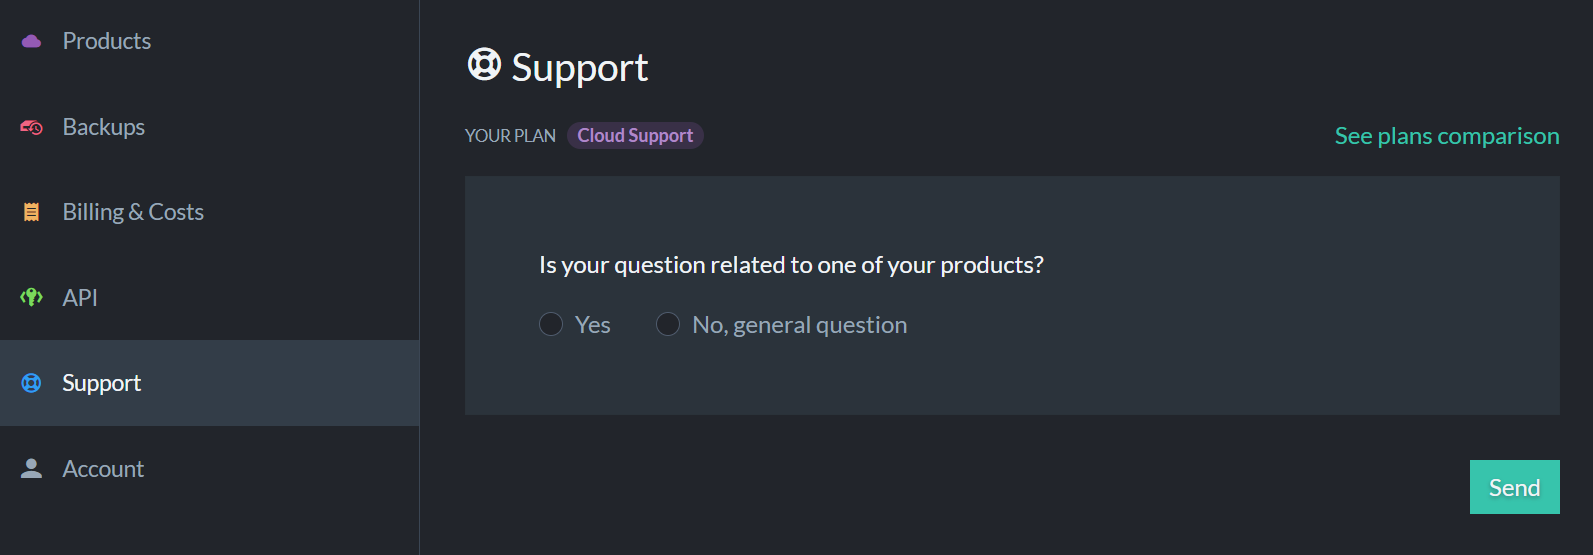 "Figure 1 - Support Tab"